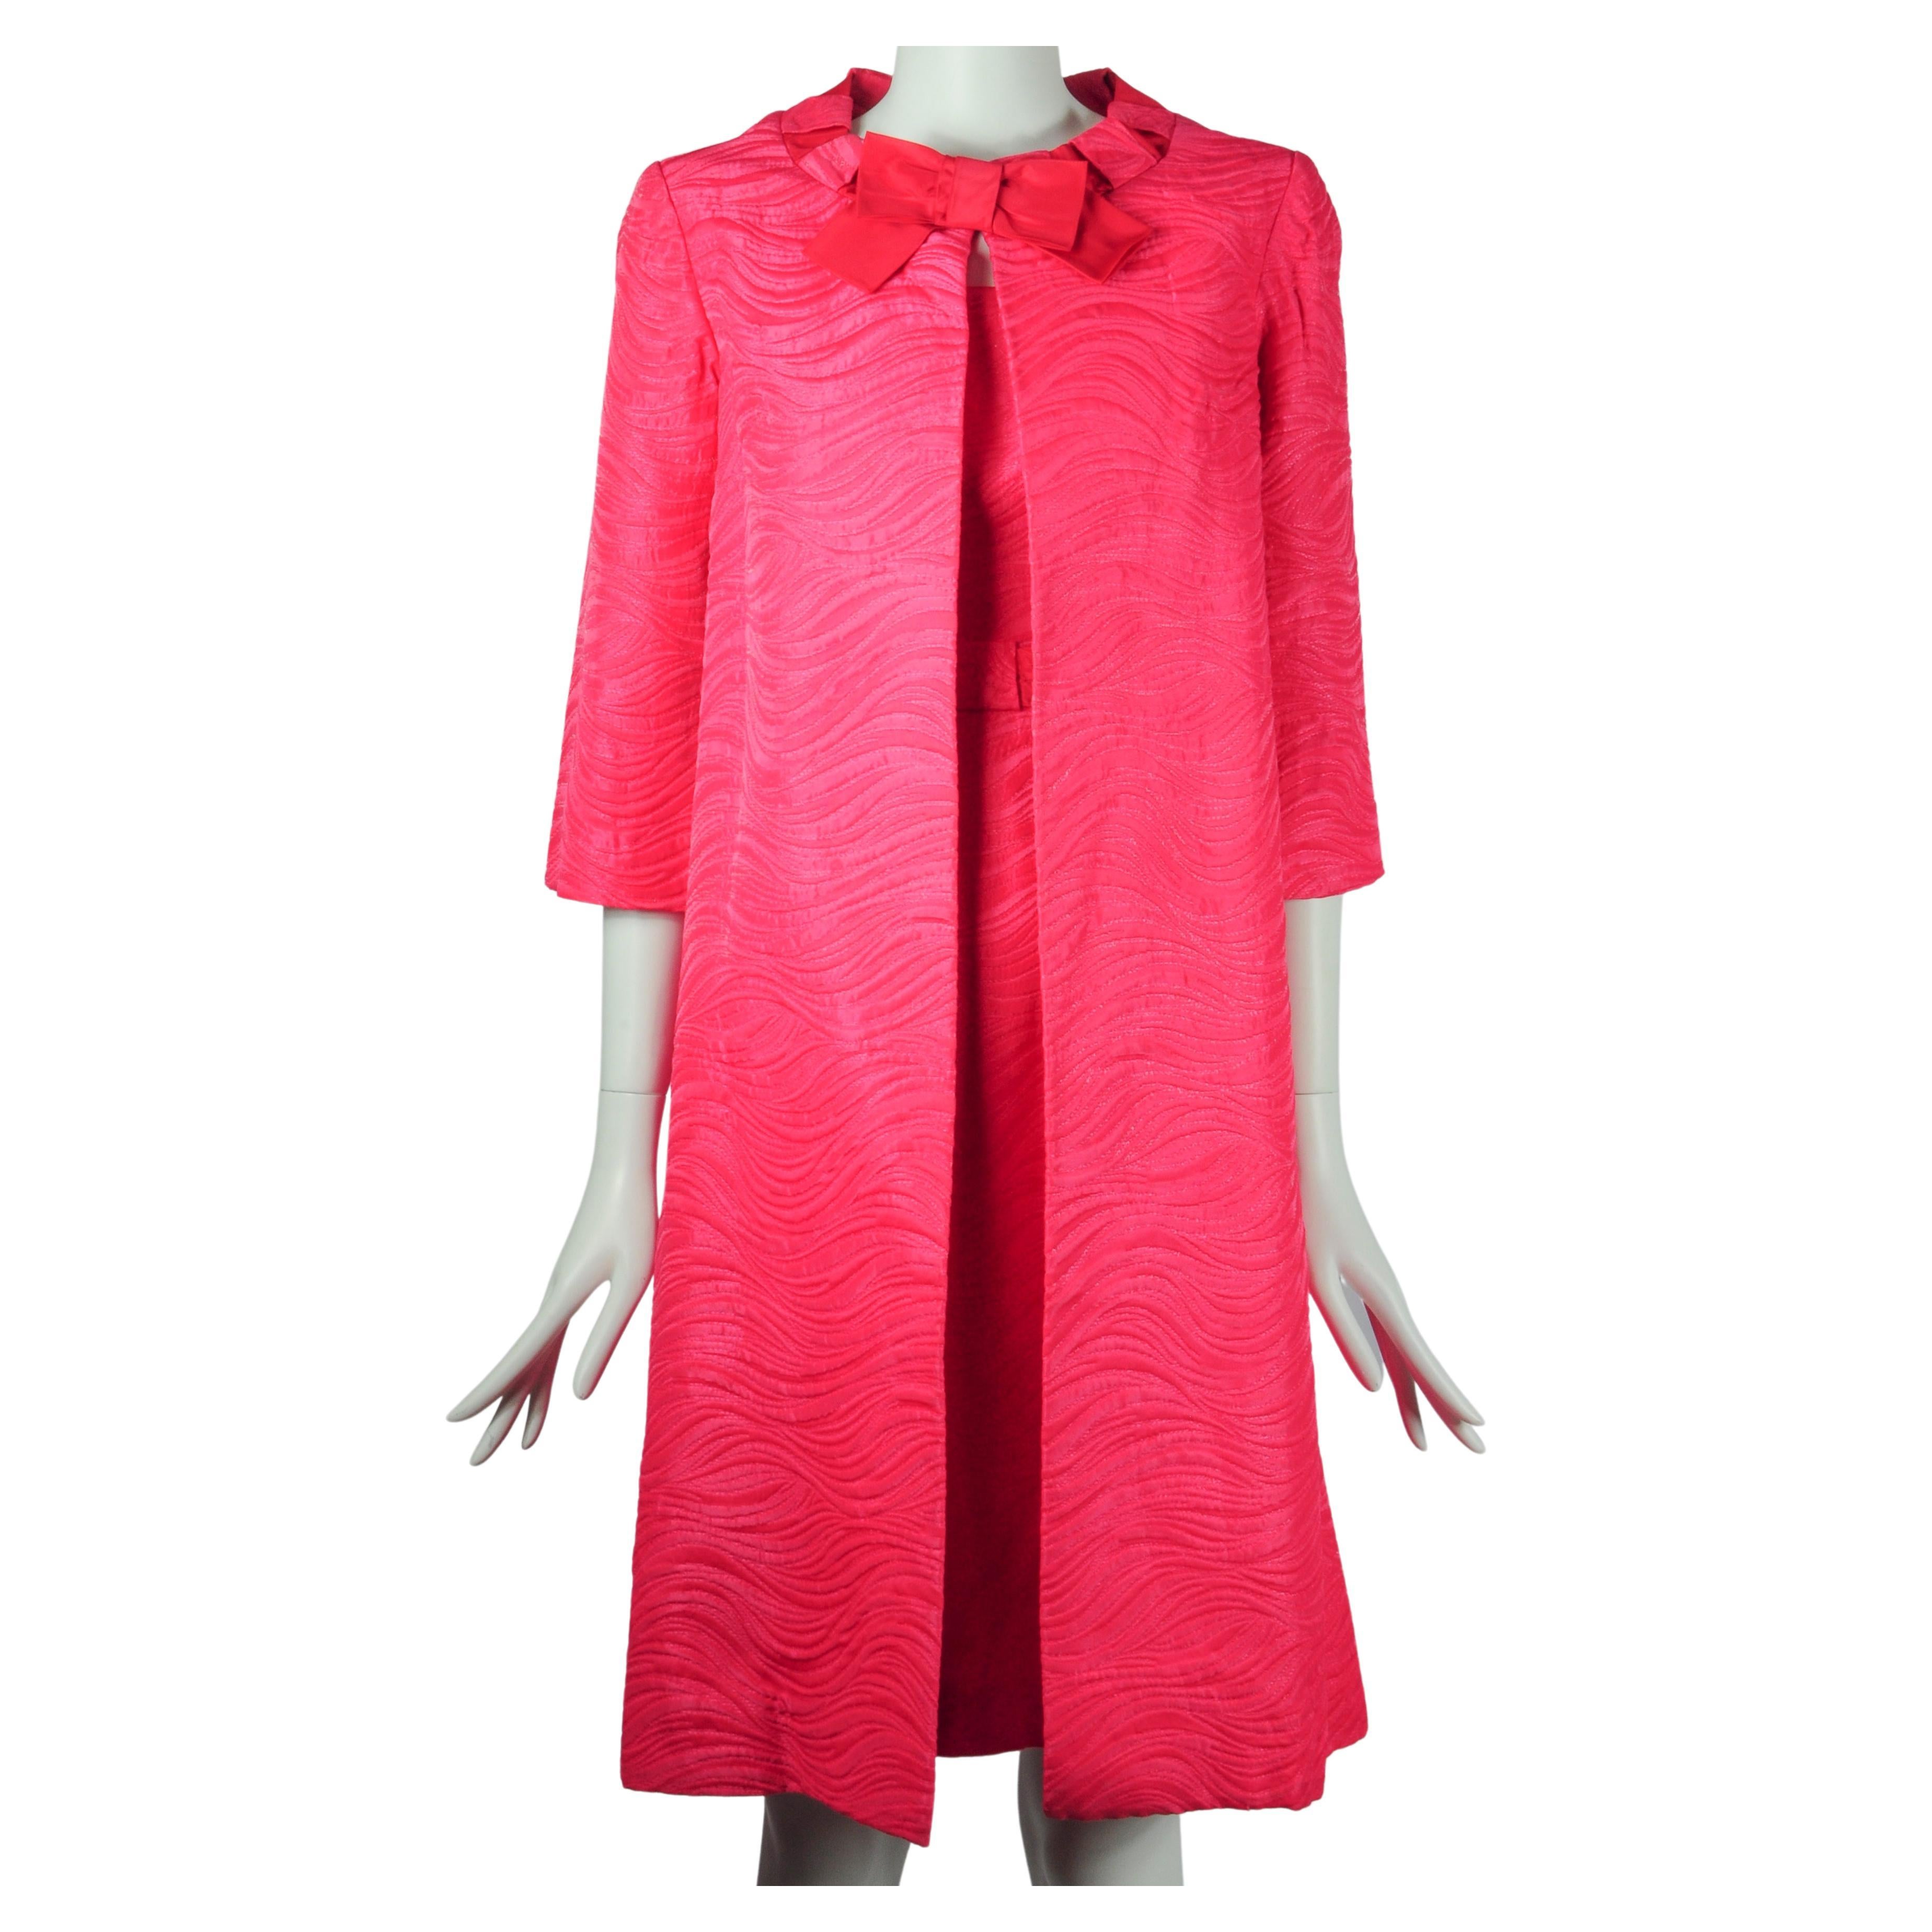 Jean Allen London Dress and Jacket Two Piece Set in Fuchsia Pink with Bow Detail For Sale